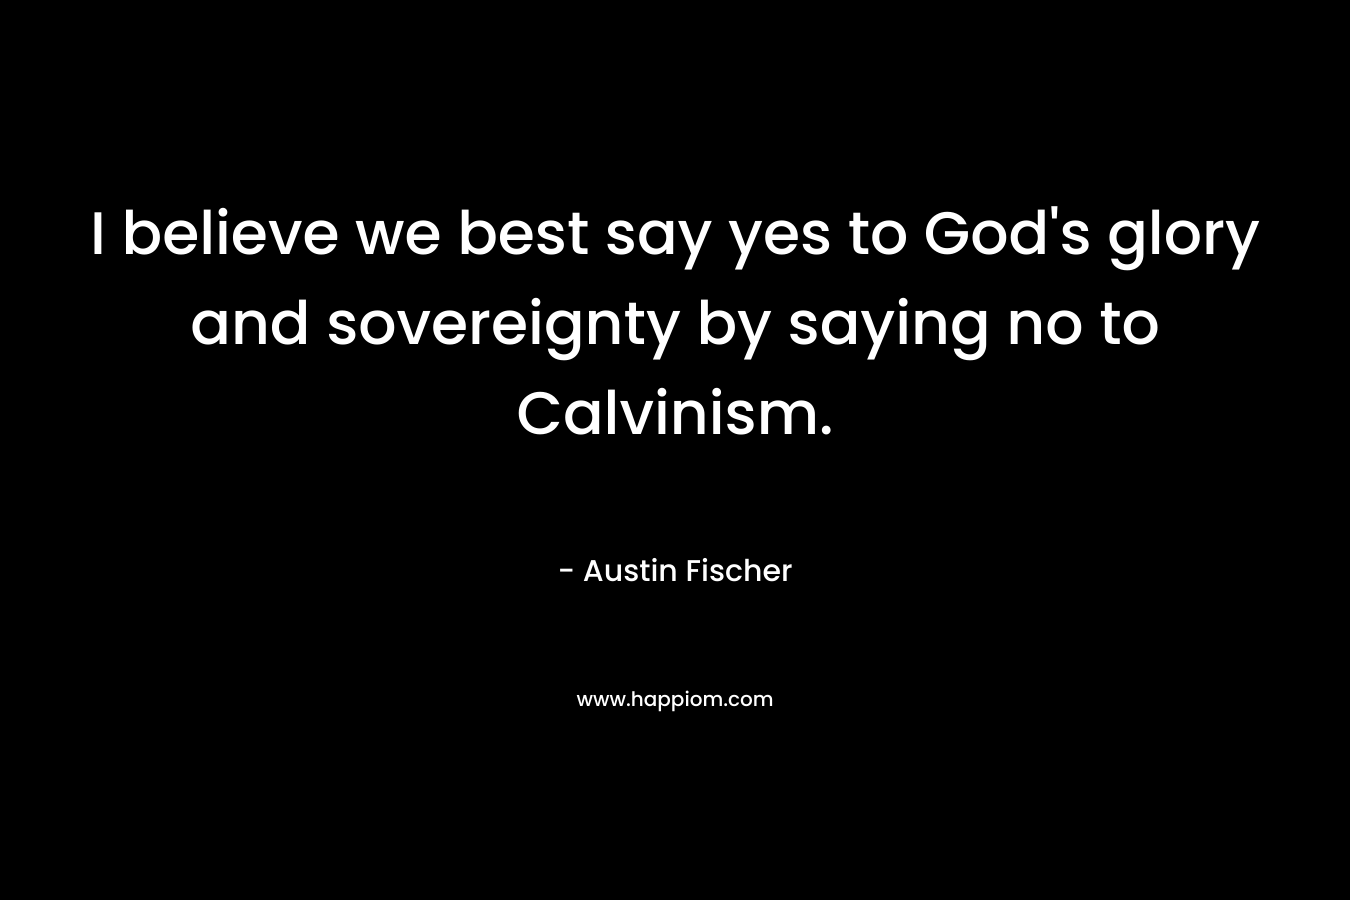 I believe we best say yes to God's glory and sovereignty by saying no to Calvinism.